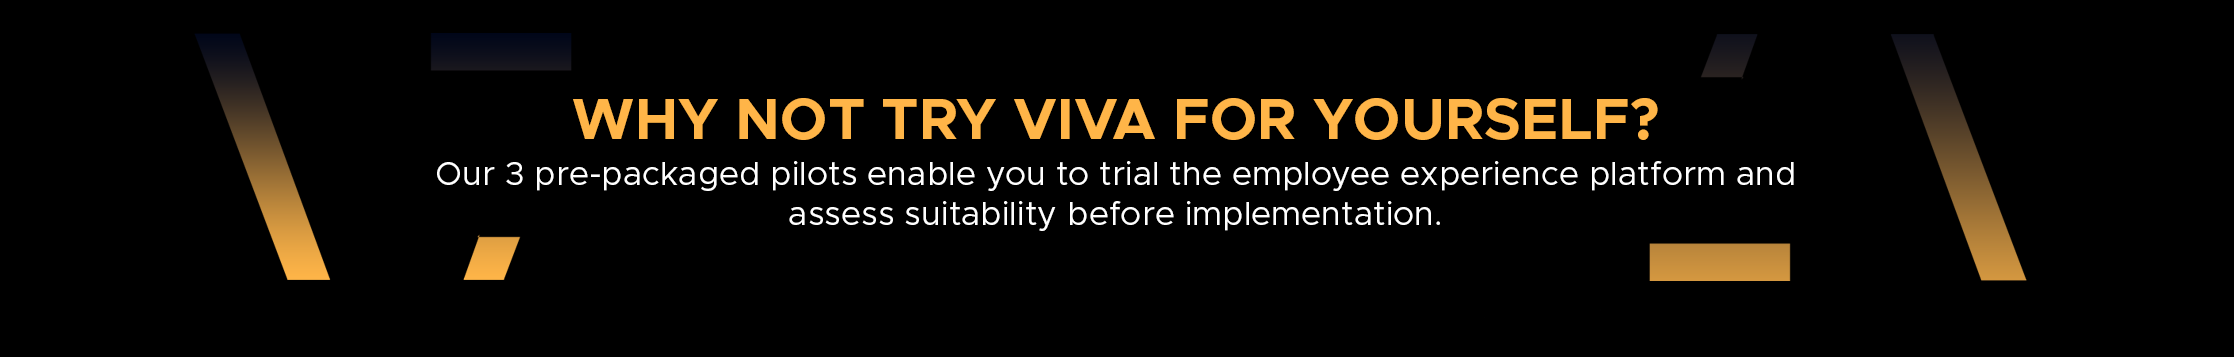 Why not try Viva for yourself? Our 3 pre-packaged pilots enable you to trial the employee experience platform and assess suitability before implementation.